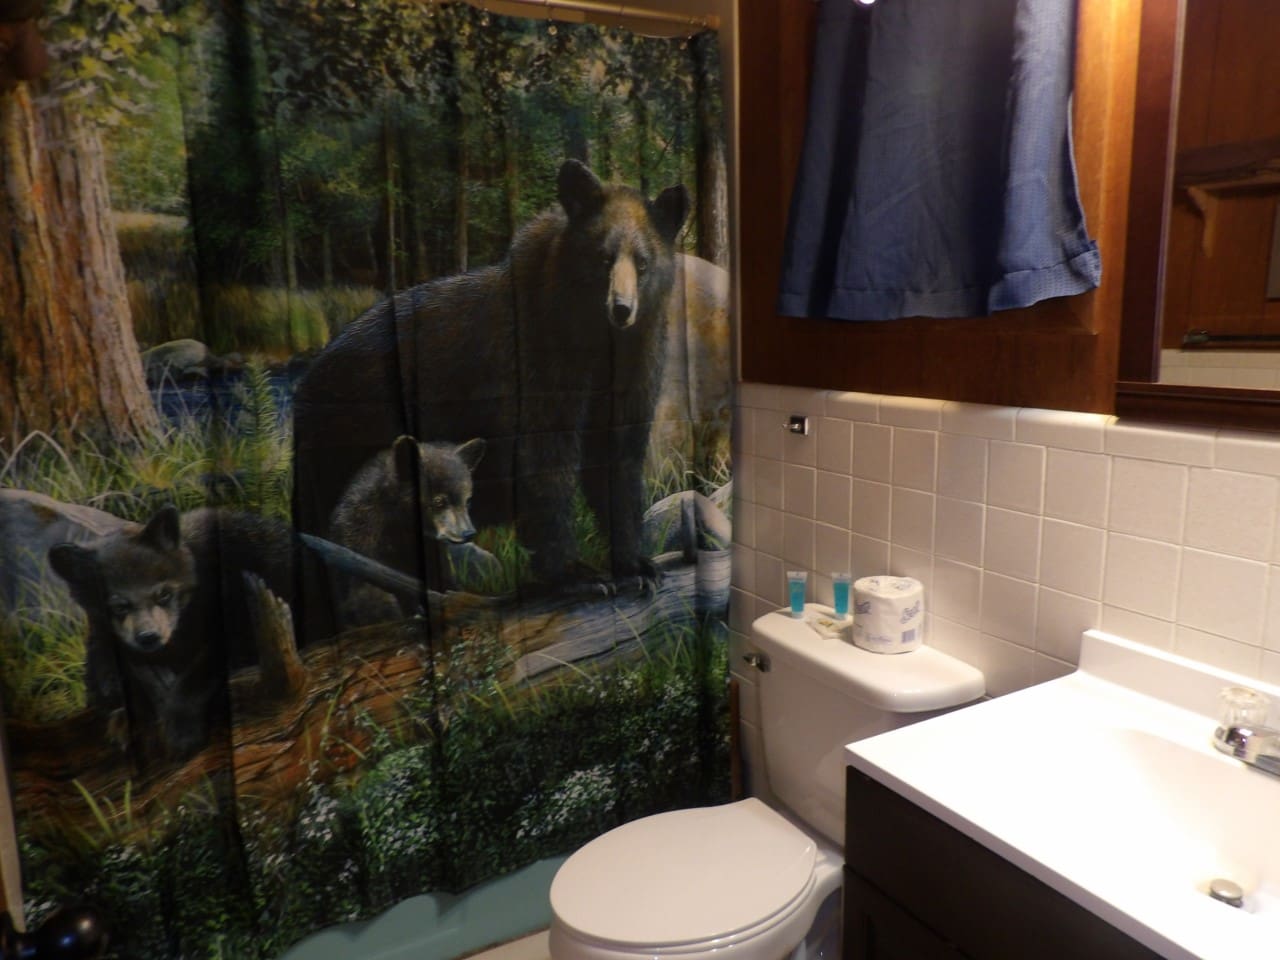 A bathroom with a shower curtain and toilet